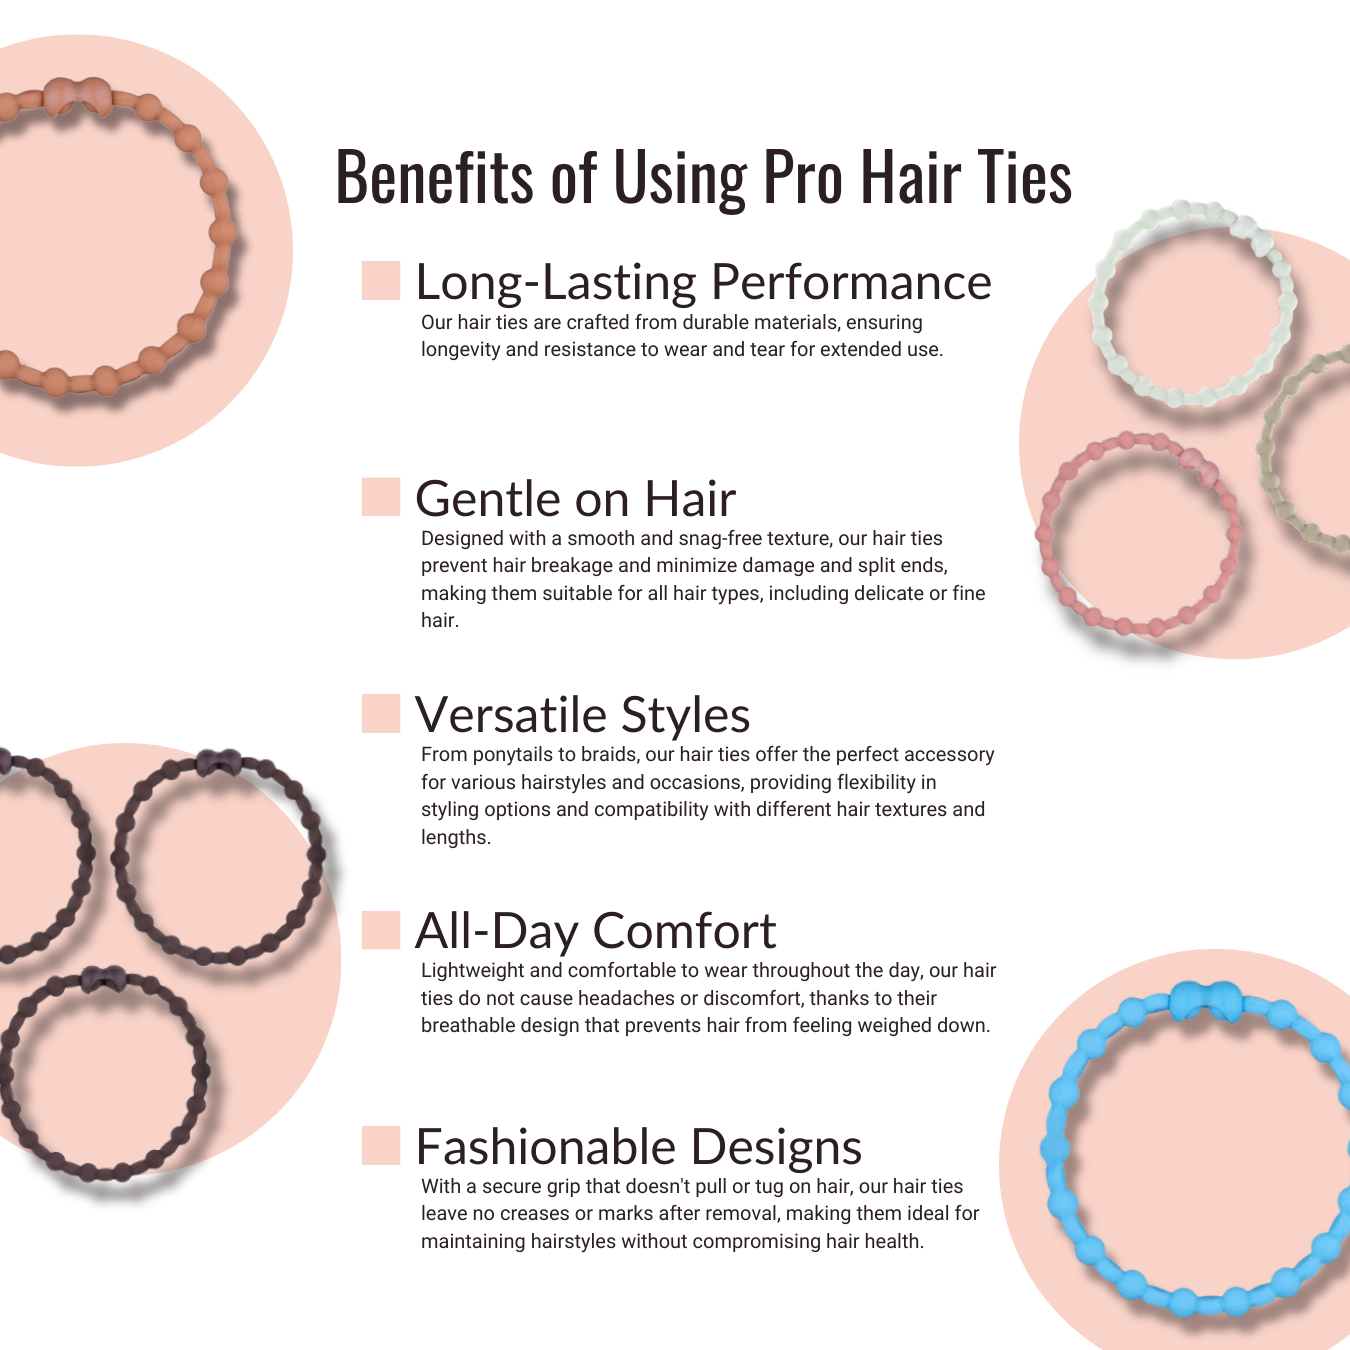 Golden Luxe Pack PRO Hair Ties (6-Pack): Luxurious Shine for Effortless Style